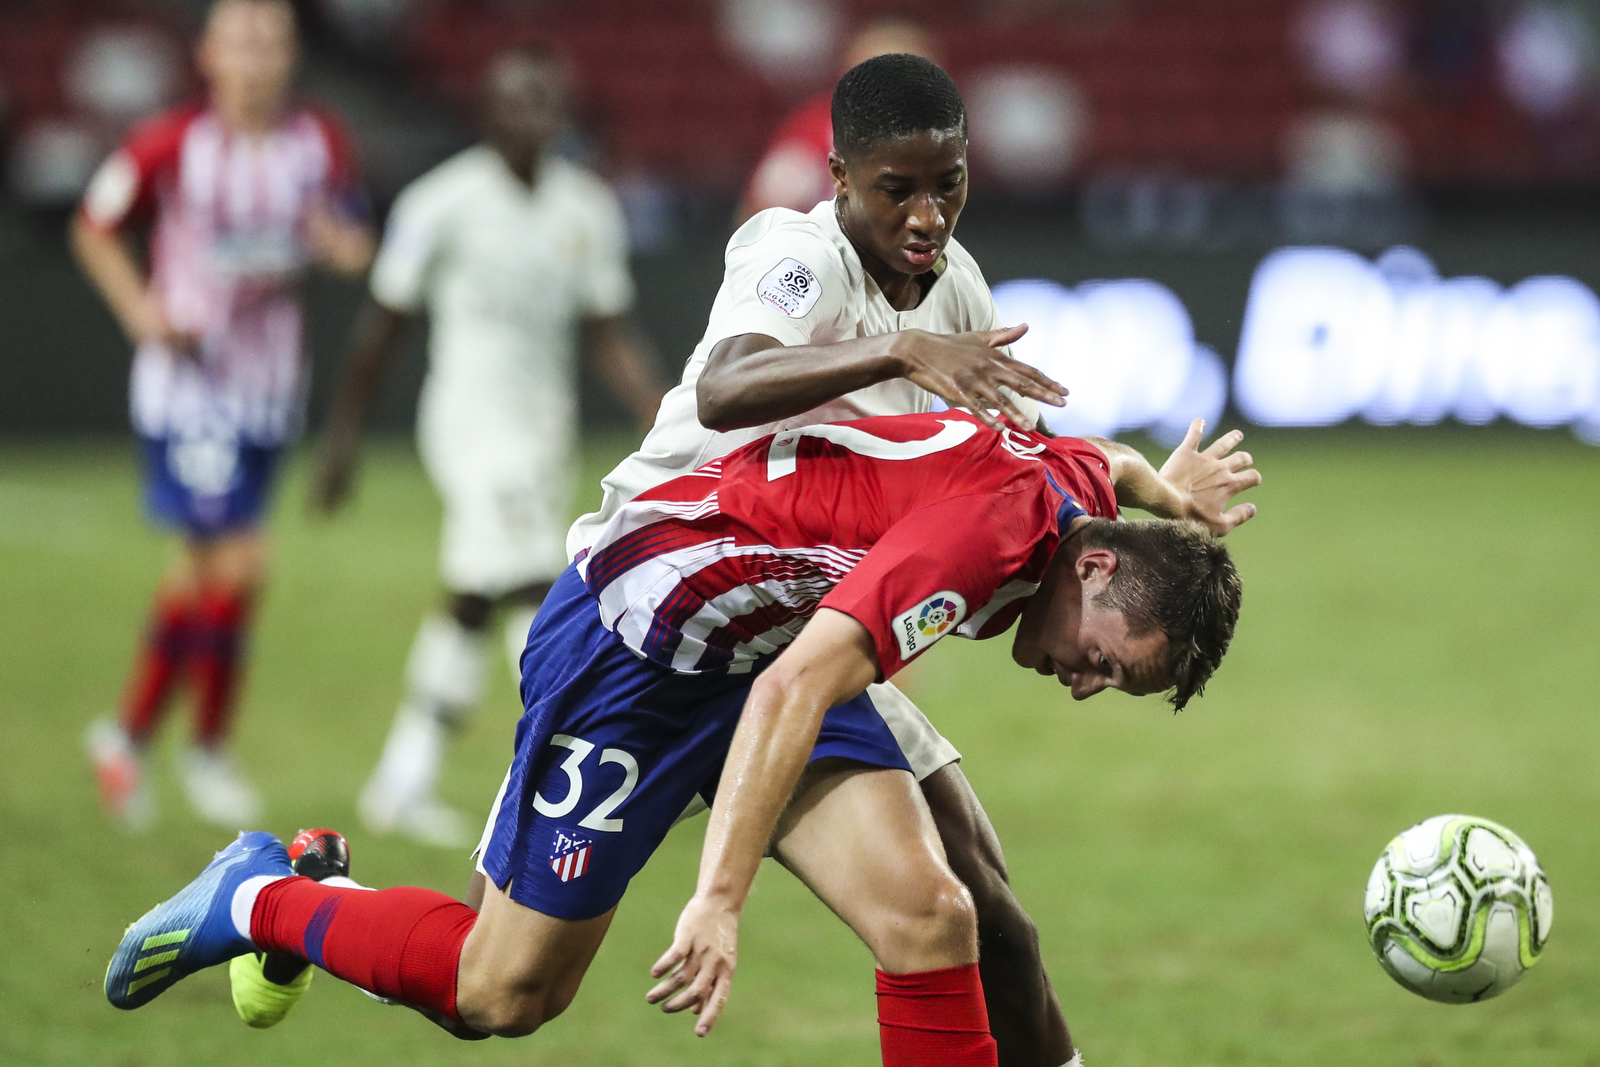  Atletico Madrid’s Borja Garces, bottom, is fouled by Paris Saint-Germain’s Moussa Sissako during the International Champions Cup match between Paris Saint-Germain and Atletico Madrid in Singapore, Monday, July 30, 2018. (AP Photo/Yong Teck Lim) 